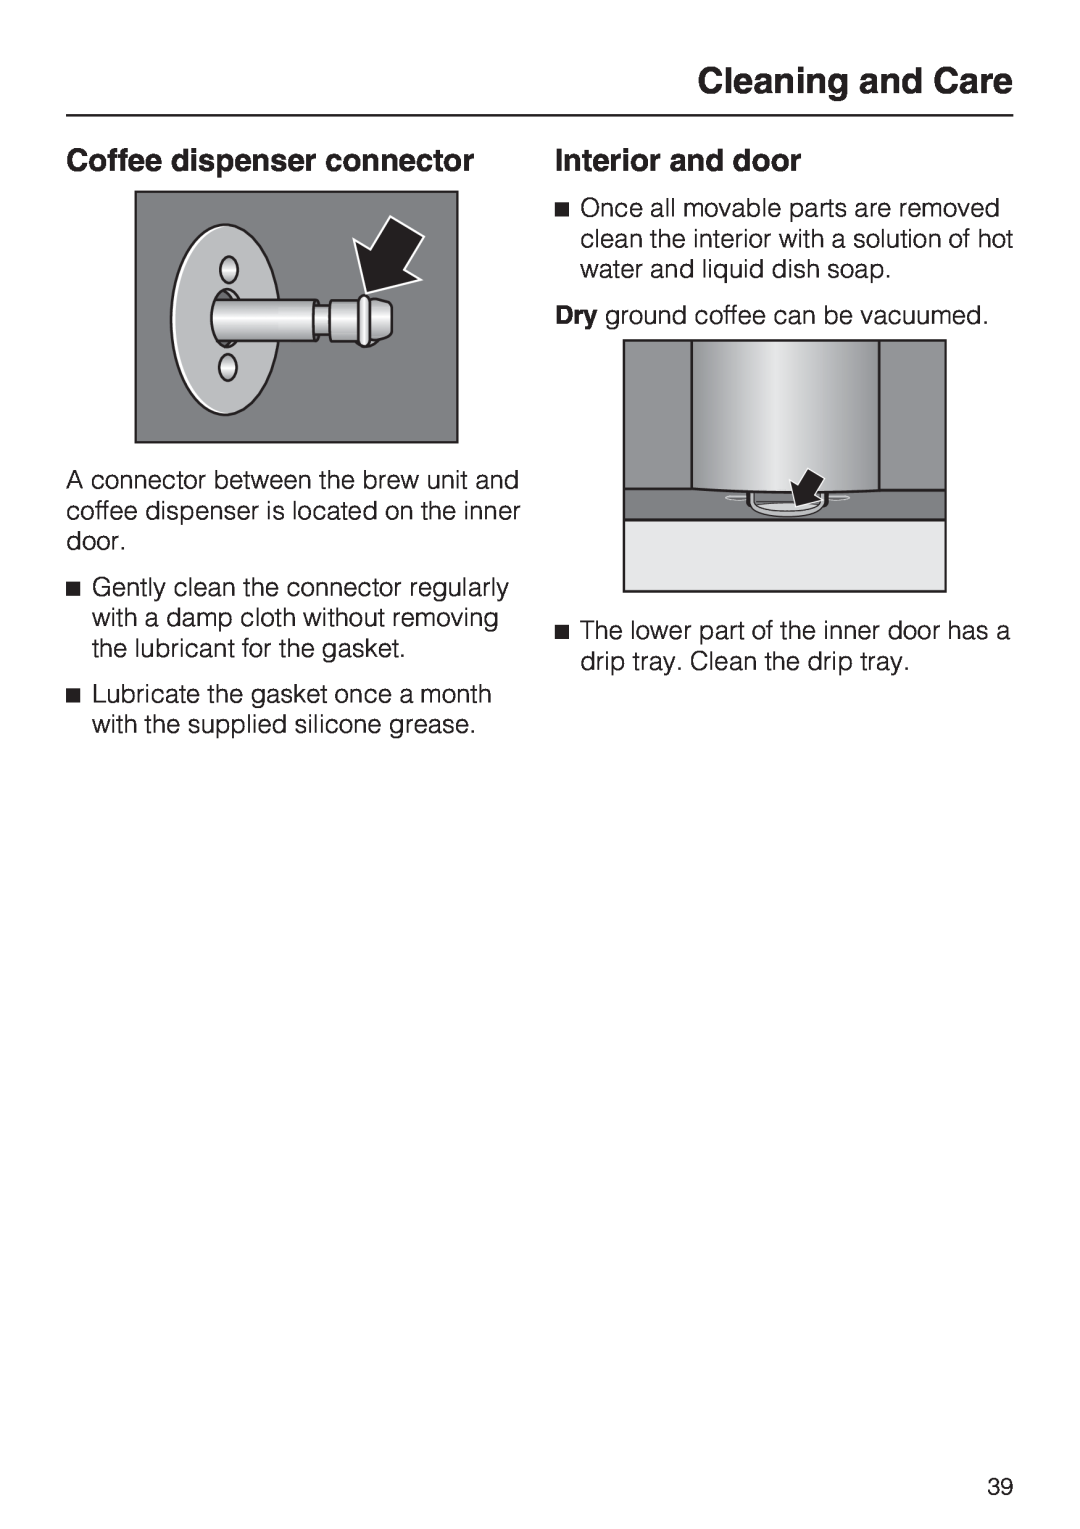 Miele CVA4075 installation instructions Coffee dispenser connector, Interior and door, Cleaning and Care 